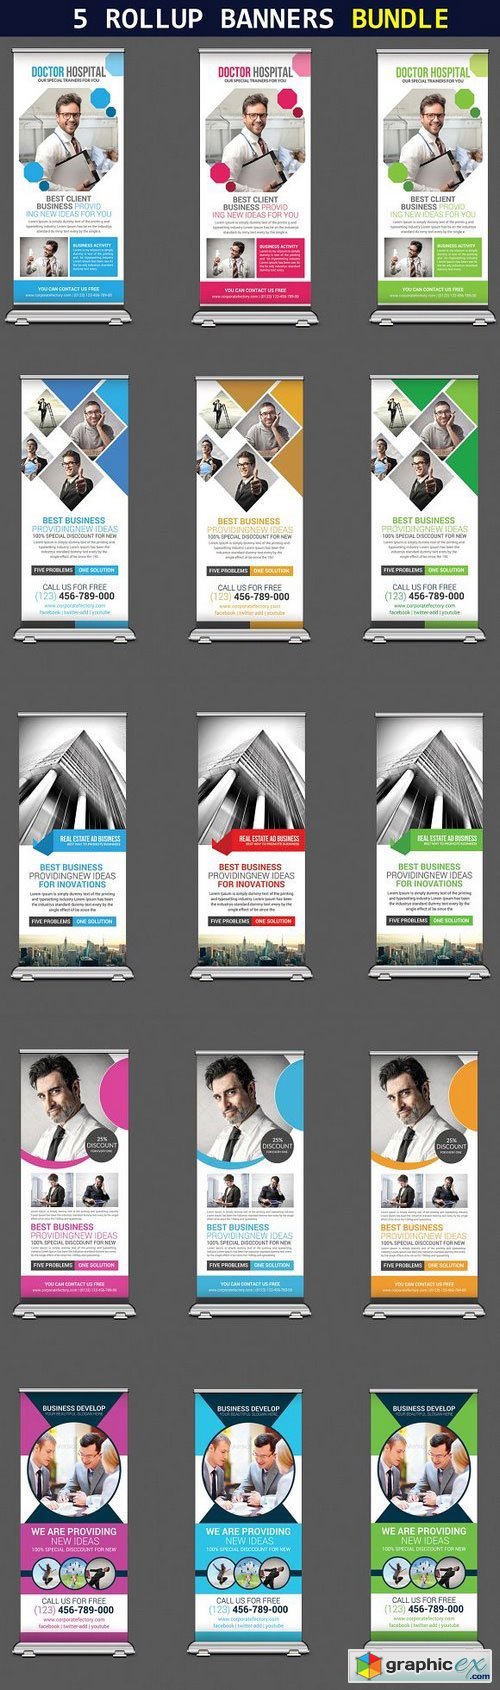 5 Business Corporate Rollup Banners